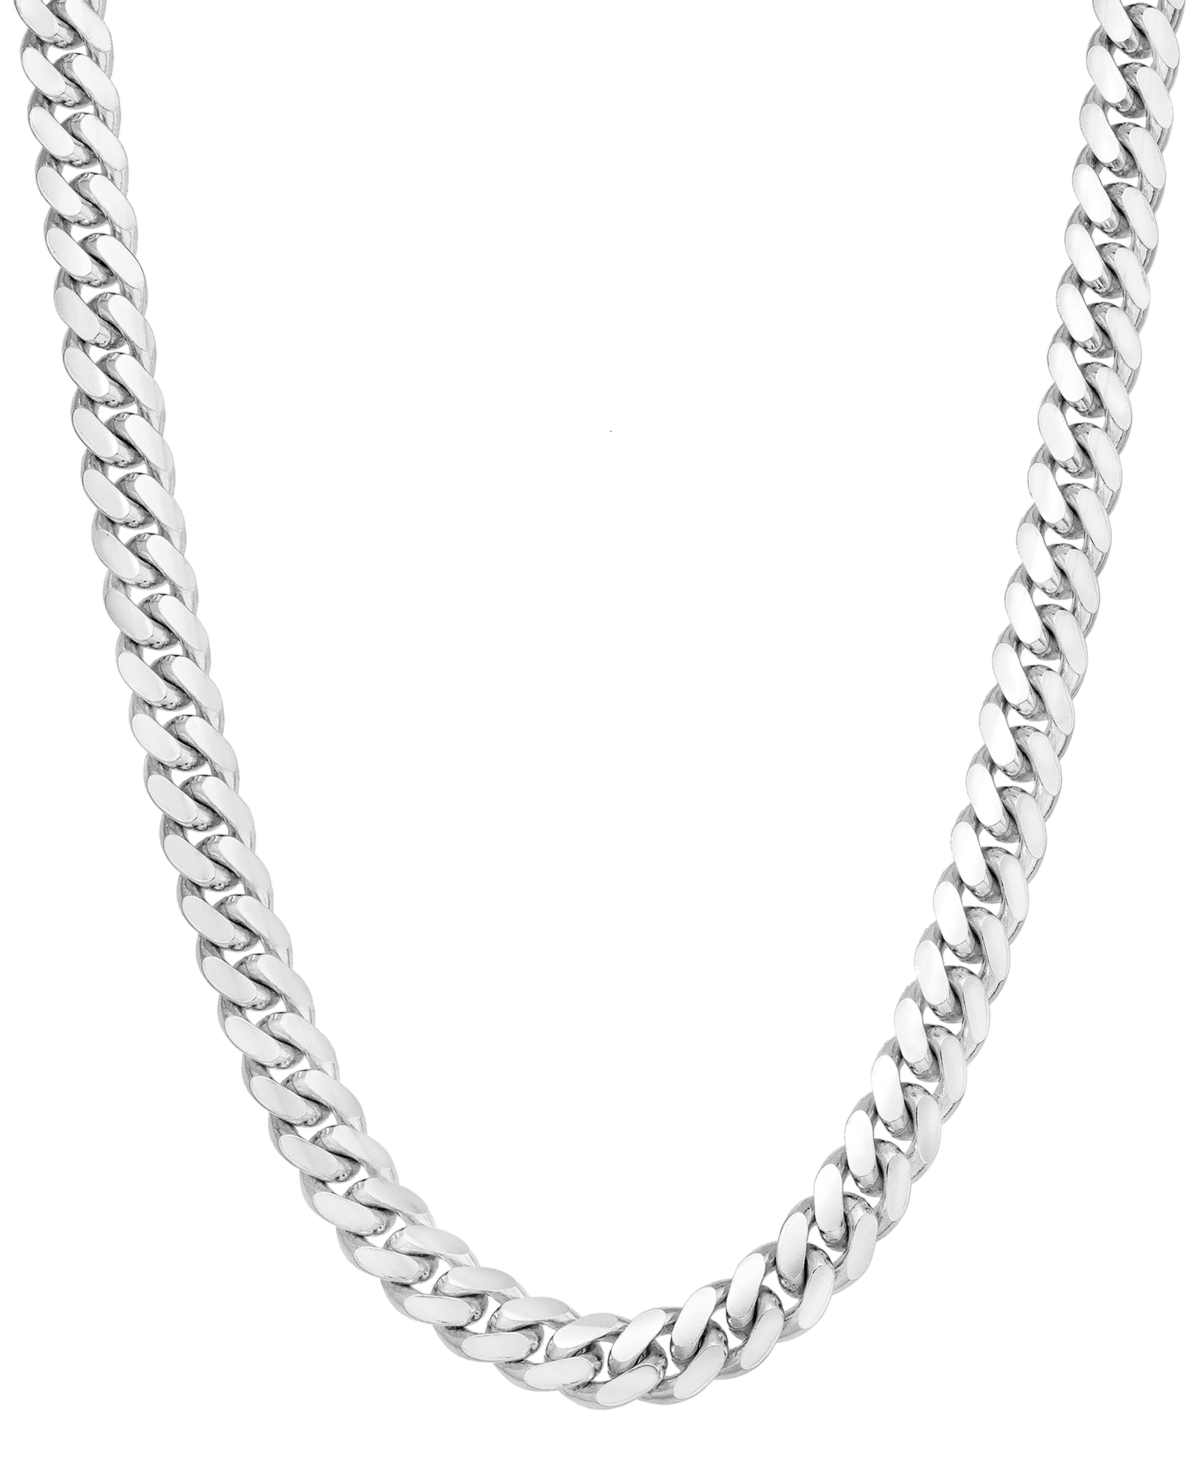 Italian Gold 16 Flat Rolo Chain Necklace (1-3/8mm) in 14k Gold - Macy's